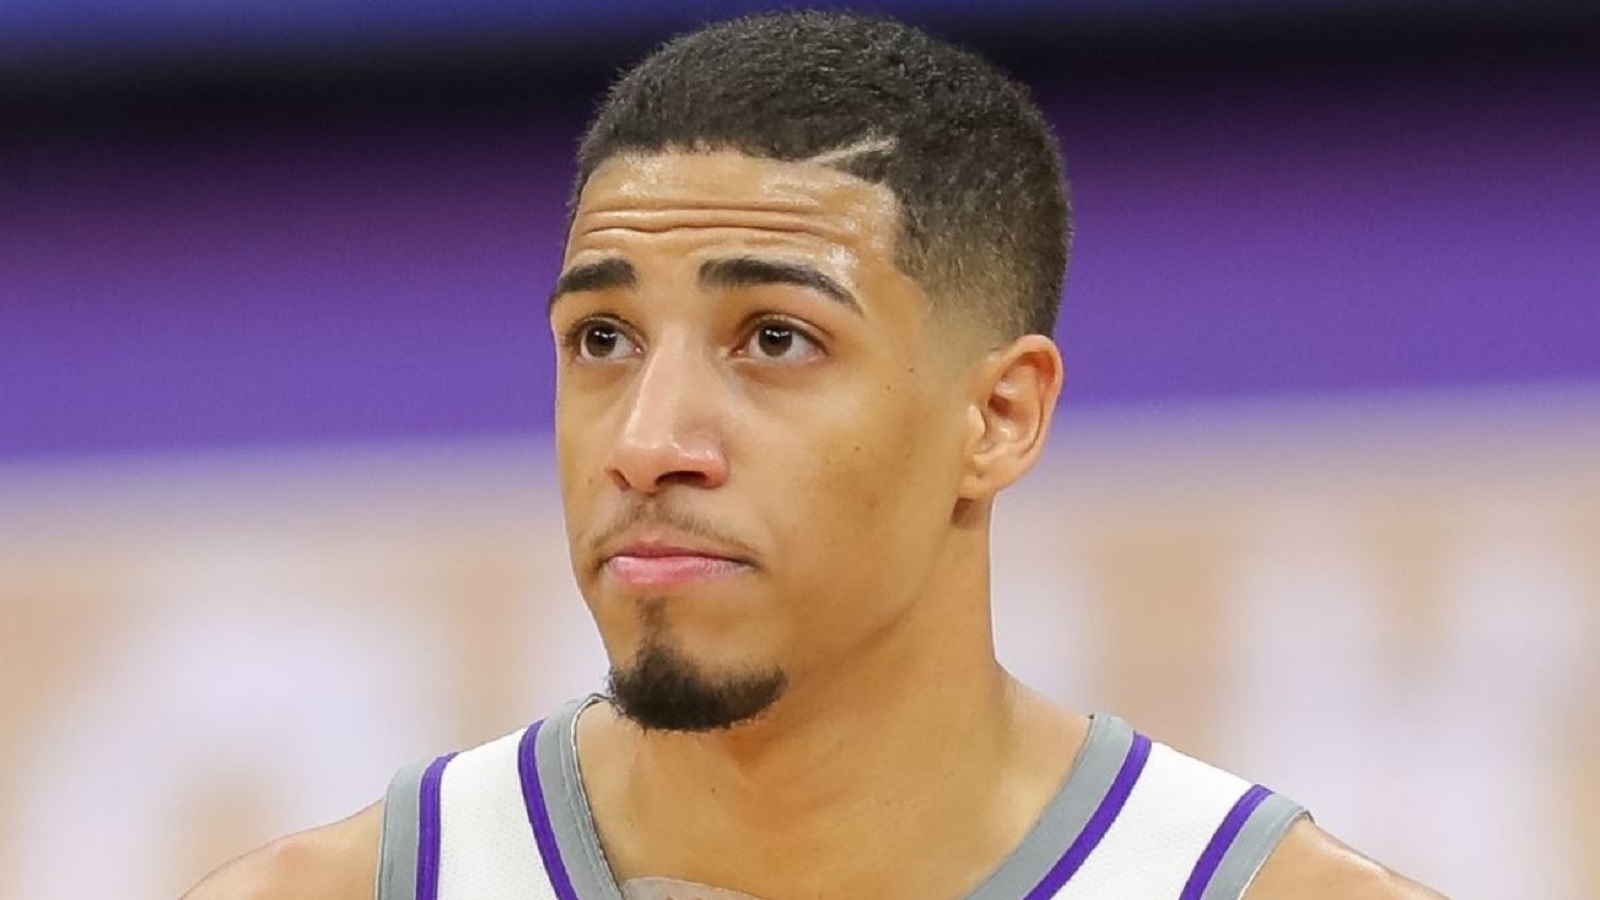 Pacers-Kings trade reaction: Fans react to Tyrese Haliburton deal